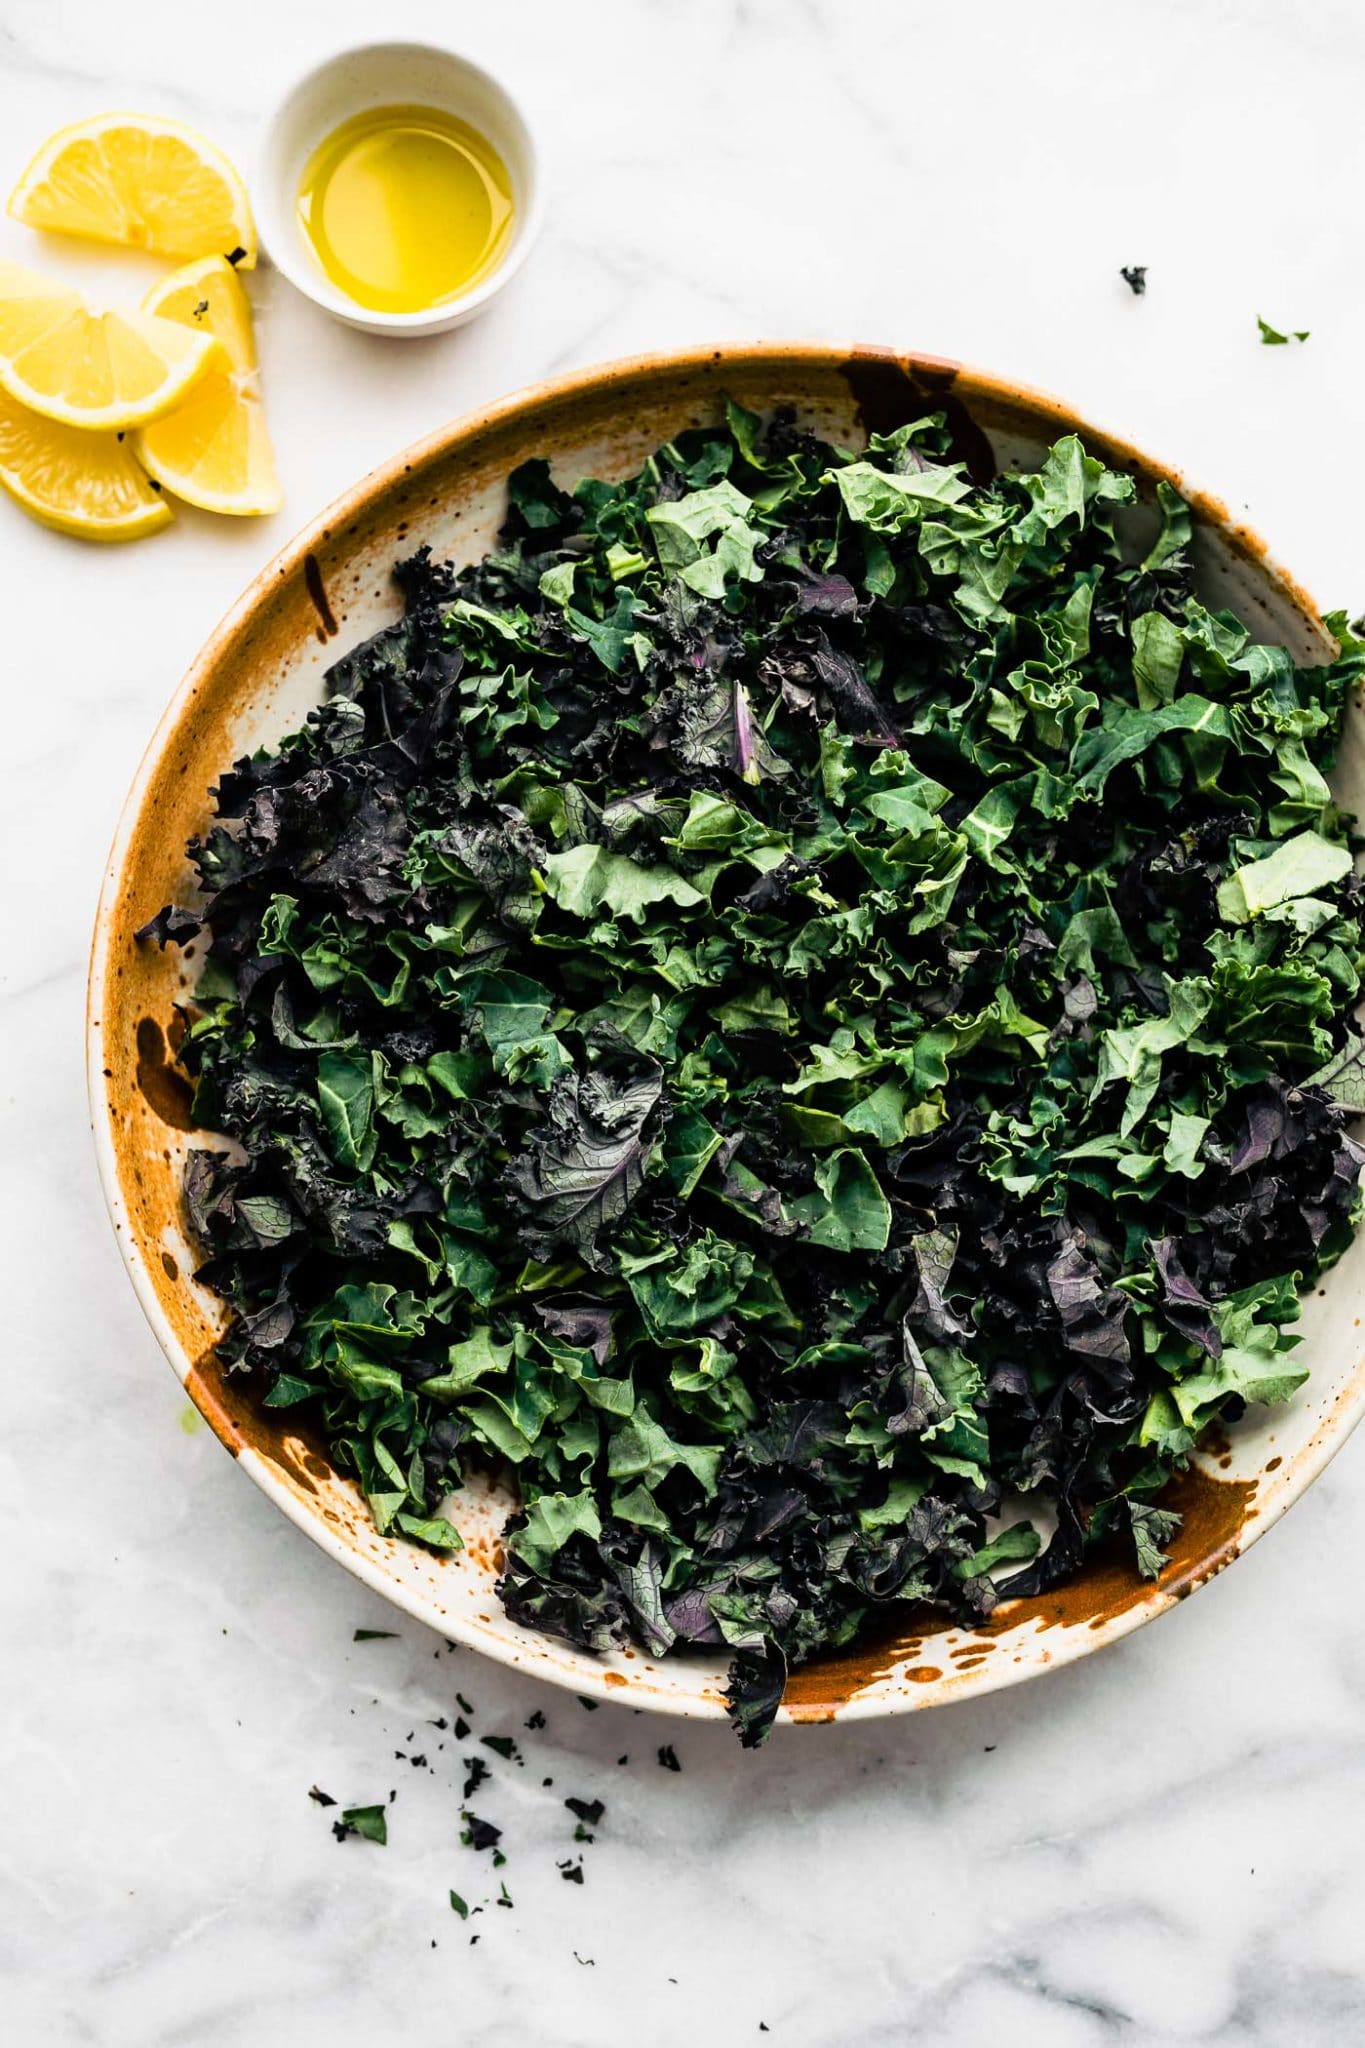 kale in a bowl with lemon wedges and a small white bowl of olive oil on the side